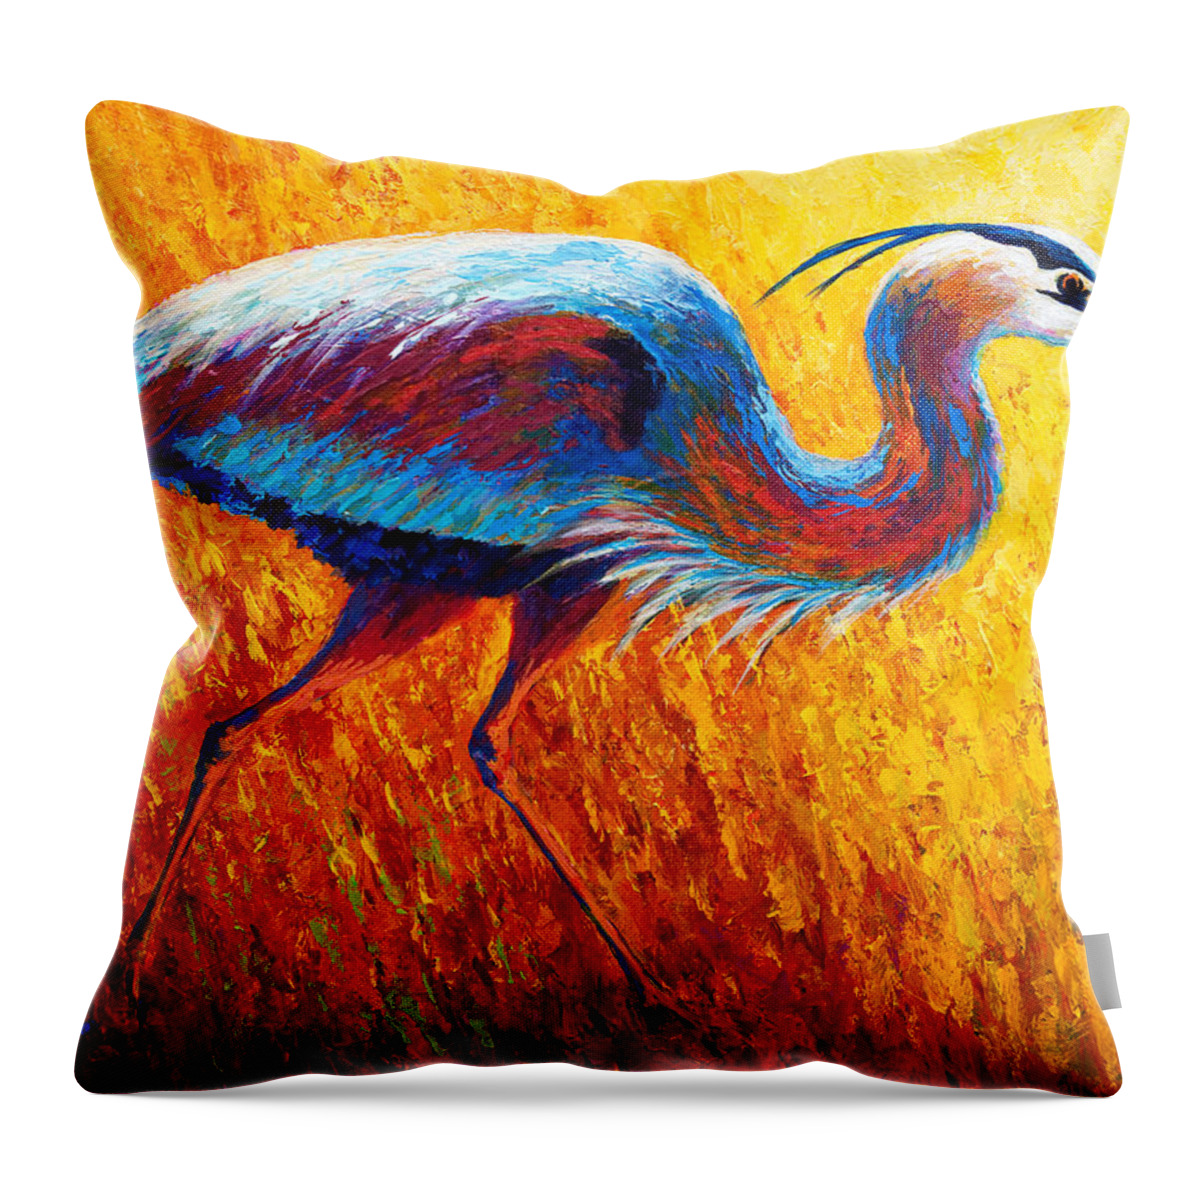 Heron Throw Pillow featuring the painting Bue Heron 2 by Marion Rose